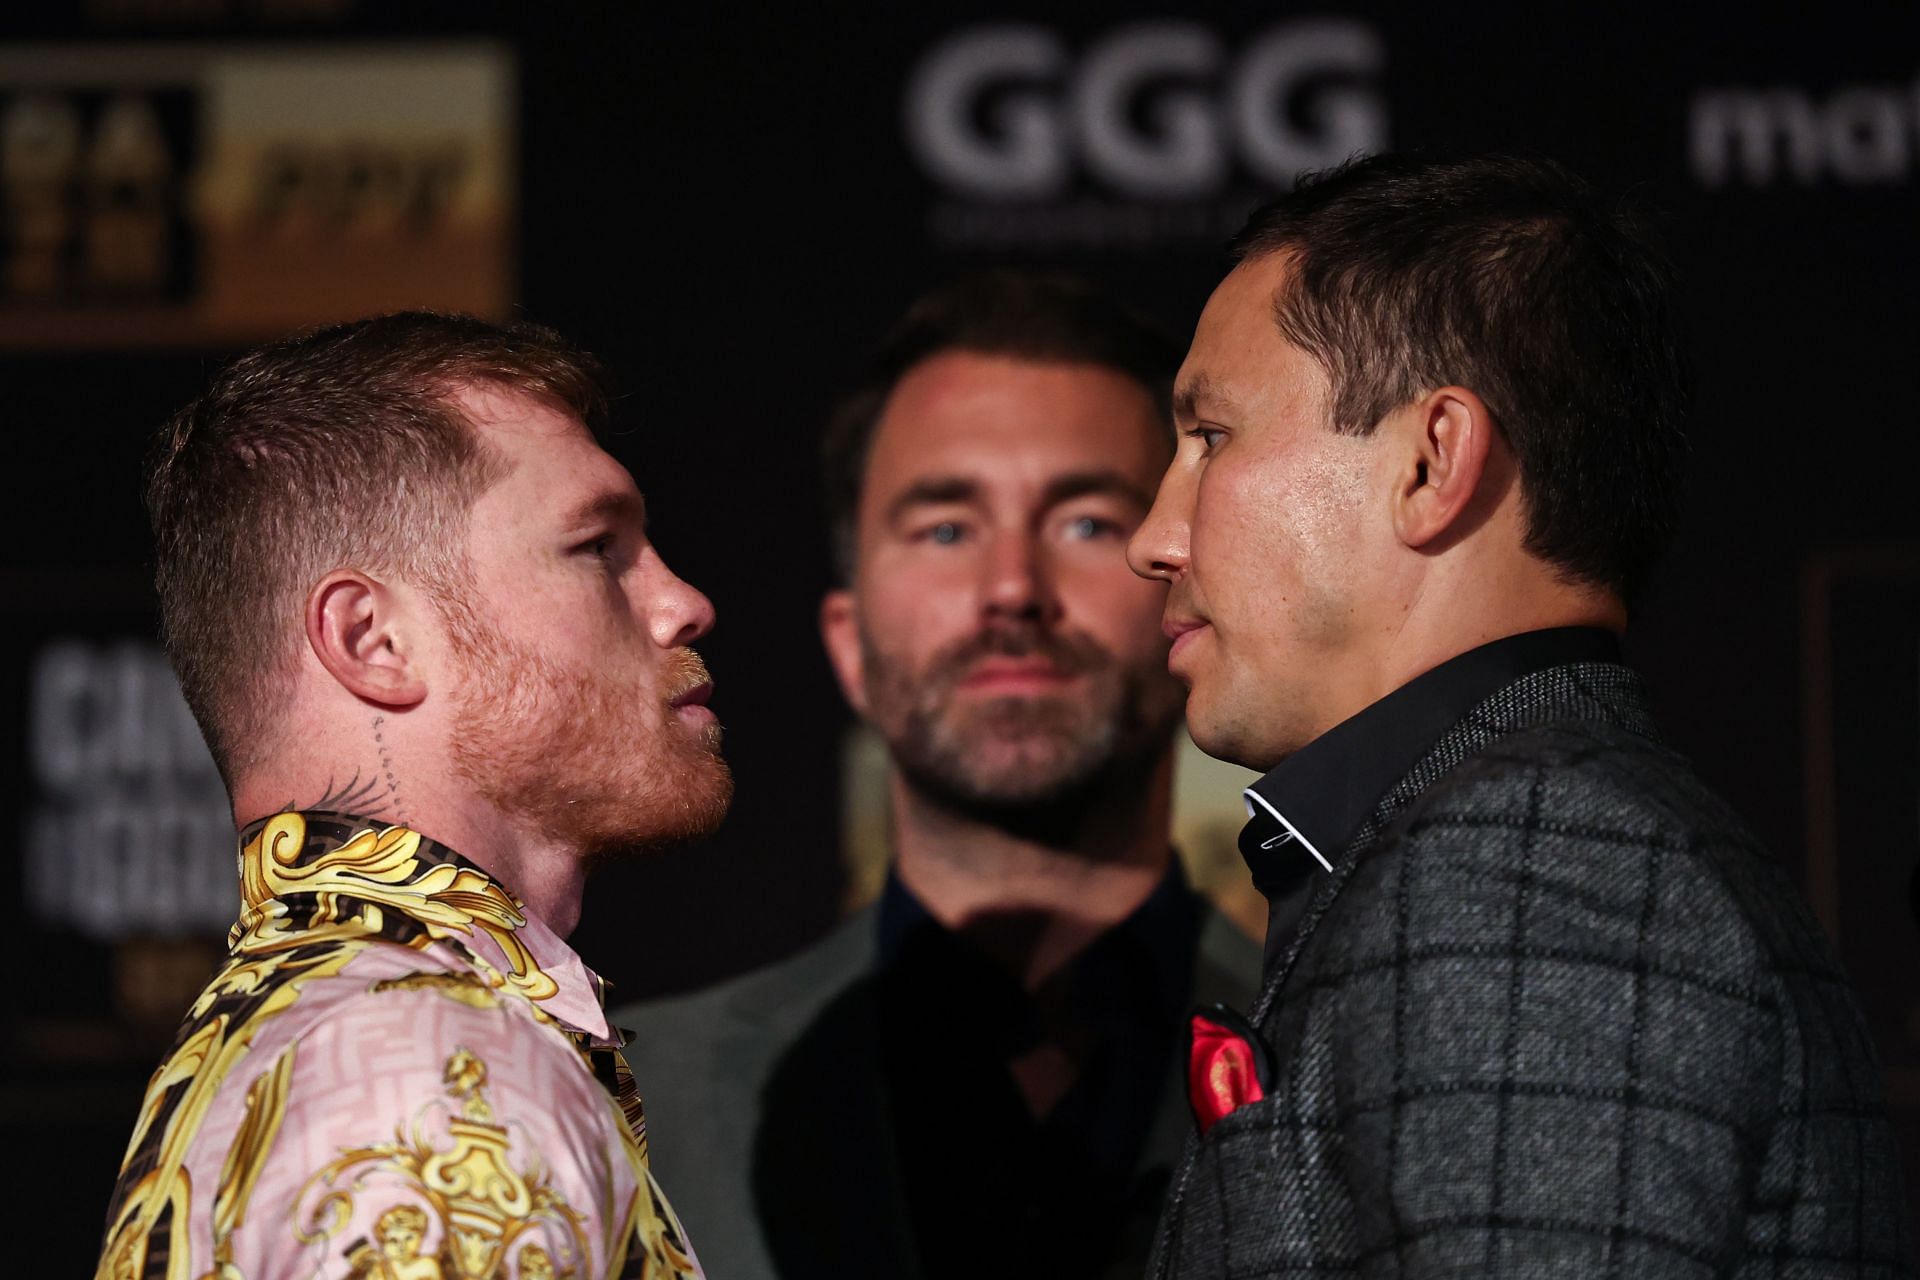 Canelo Alvarez (L) and Gennady Golovkin (R) face off during a press conference on June 27, 2022 in New York City. (Photo by Dustin Satloff/Getty Images)